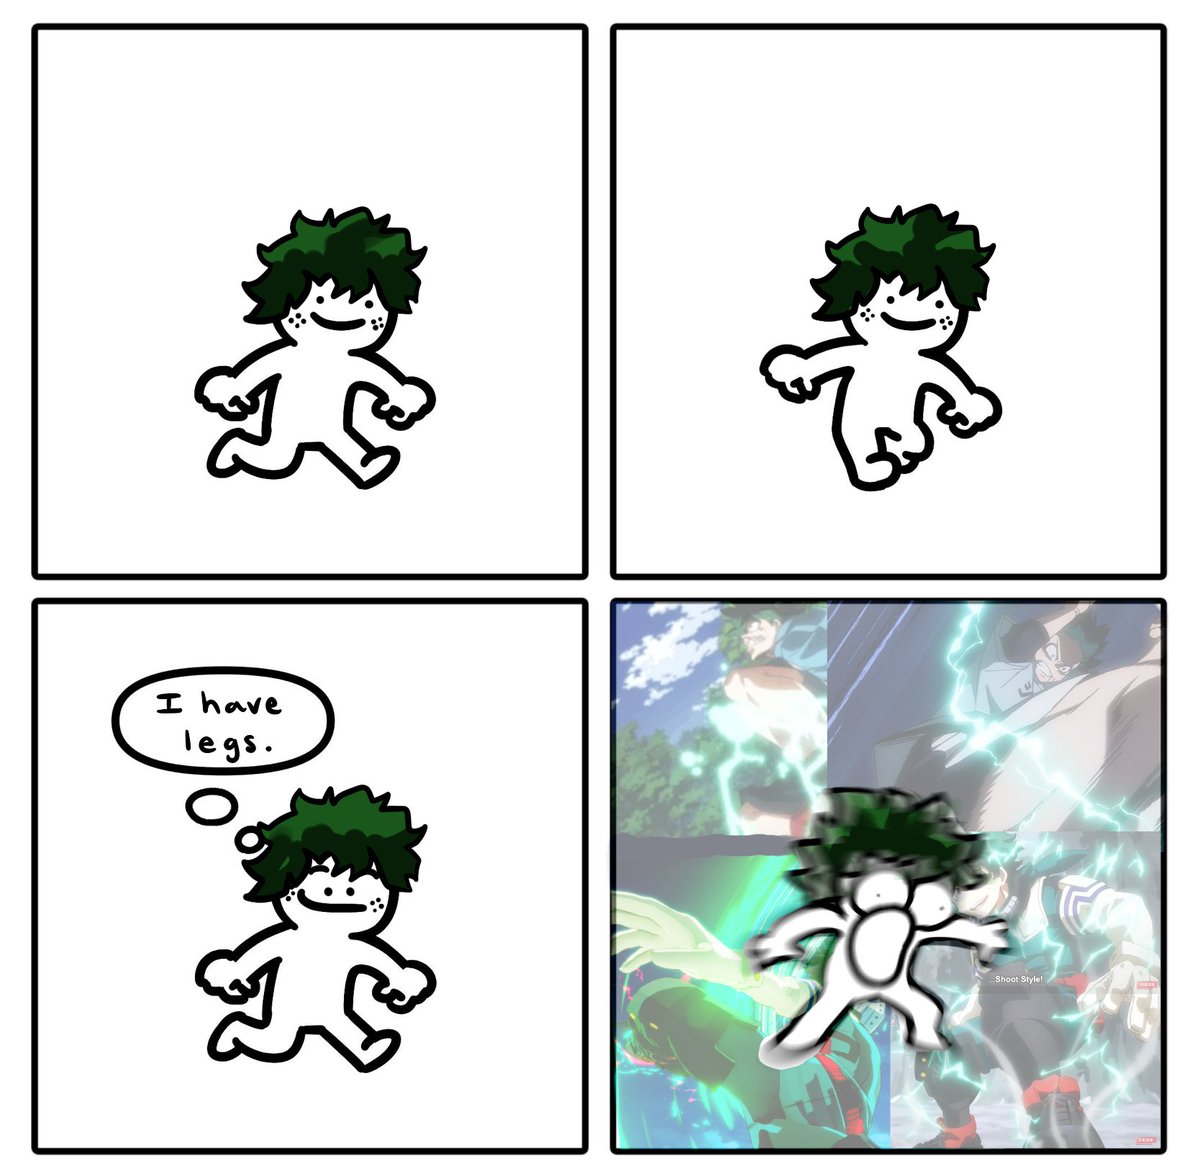 I will never not make fun of Deku for this, the precious kicky bean